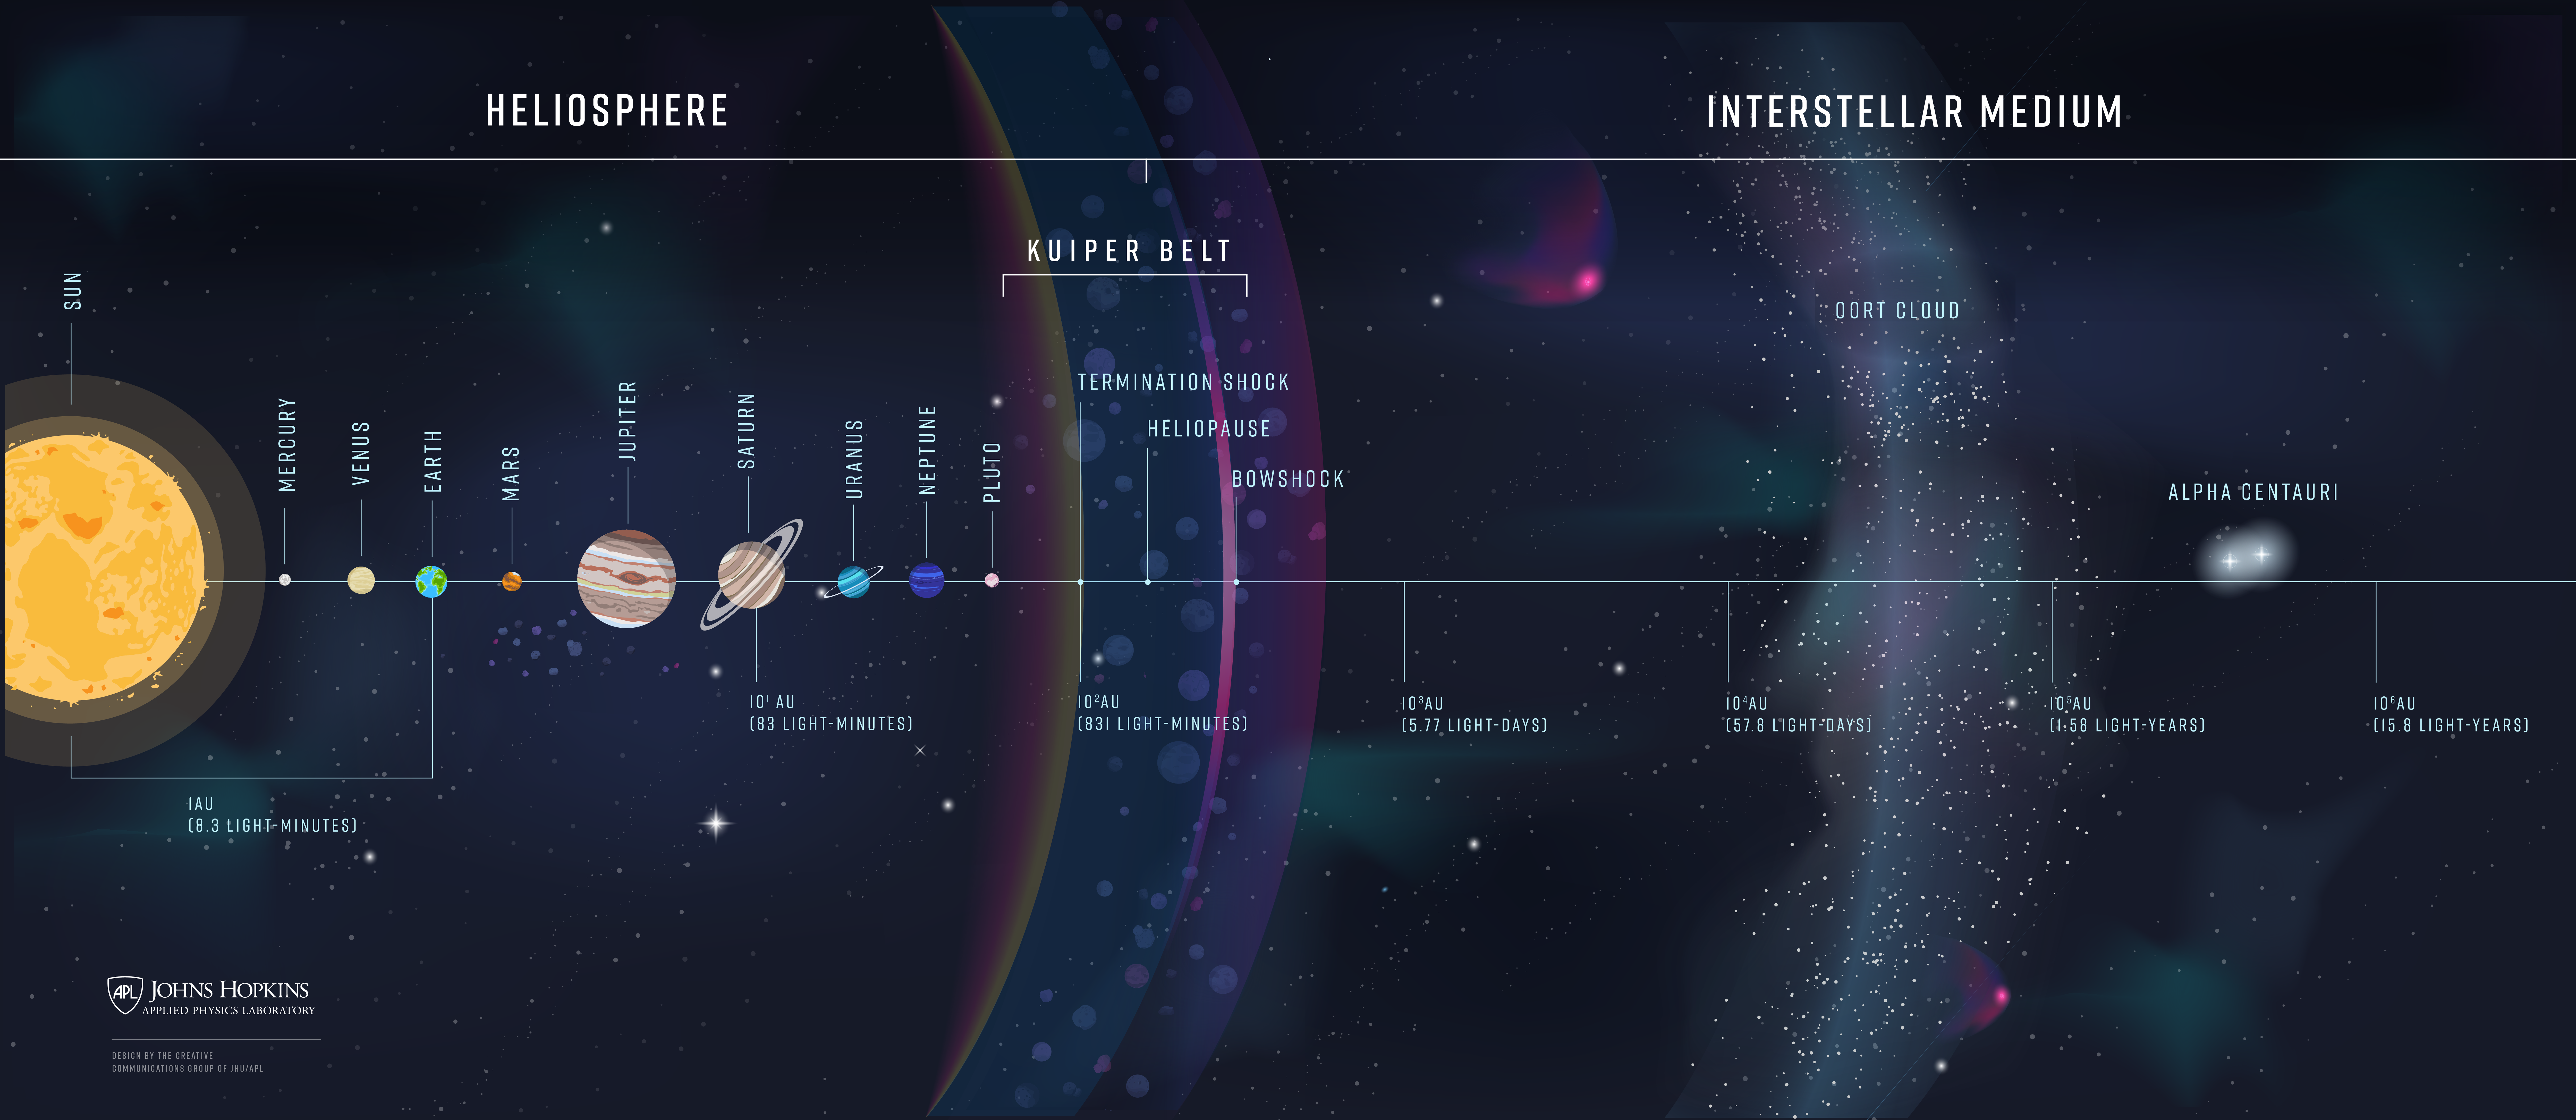 Interstellar Probe is a multi-decade mission to reach several hundred astronomical units.